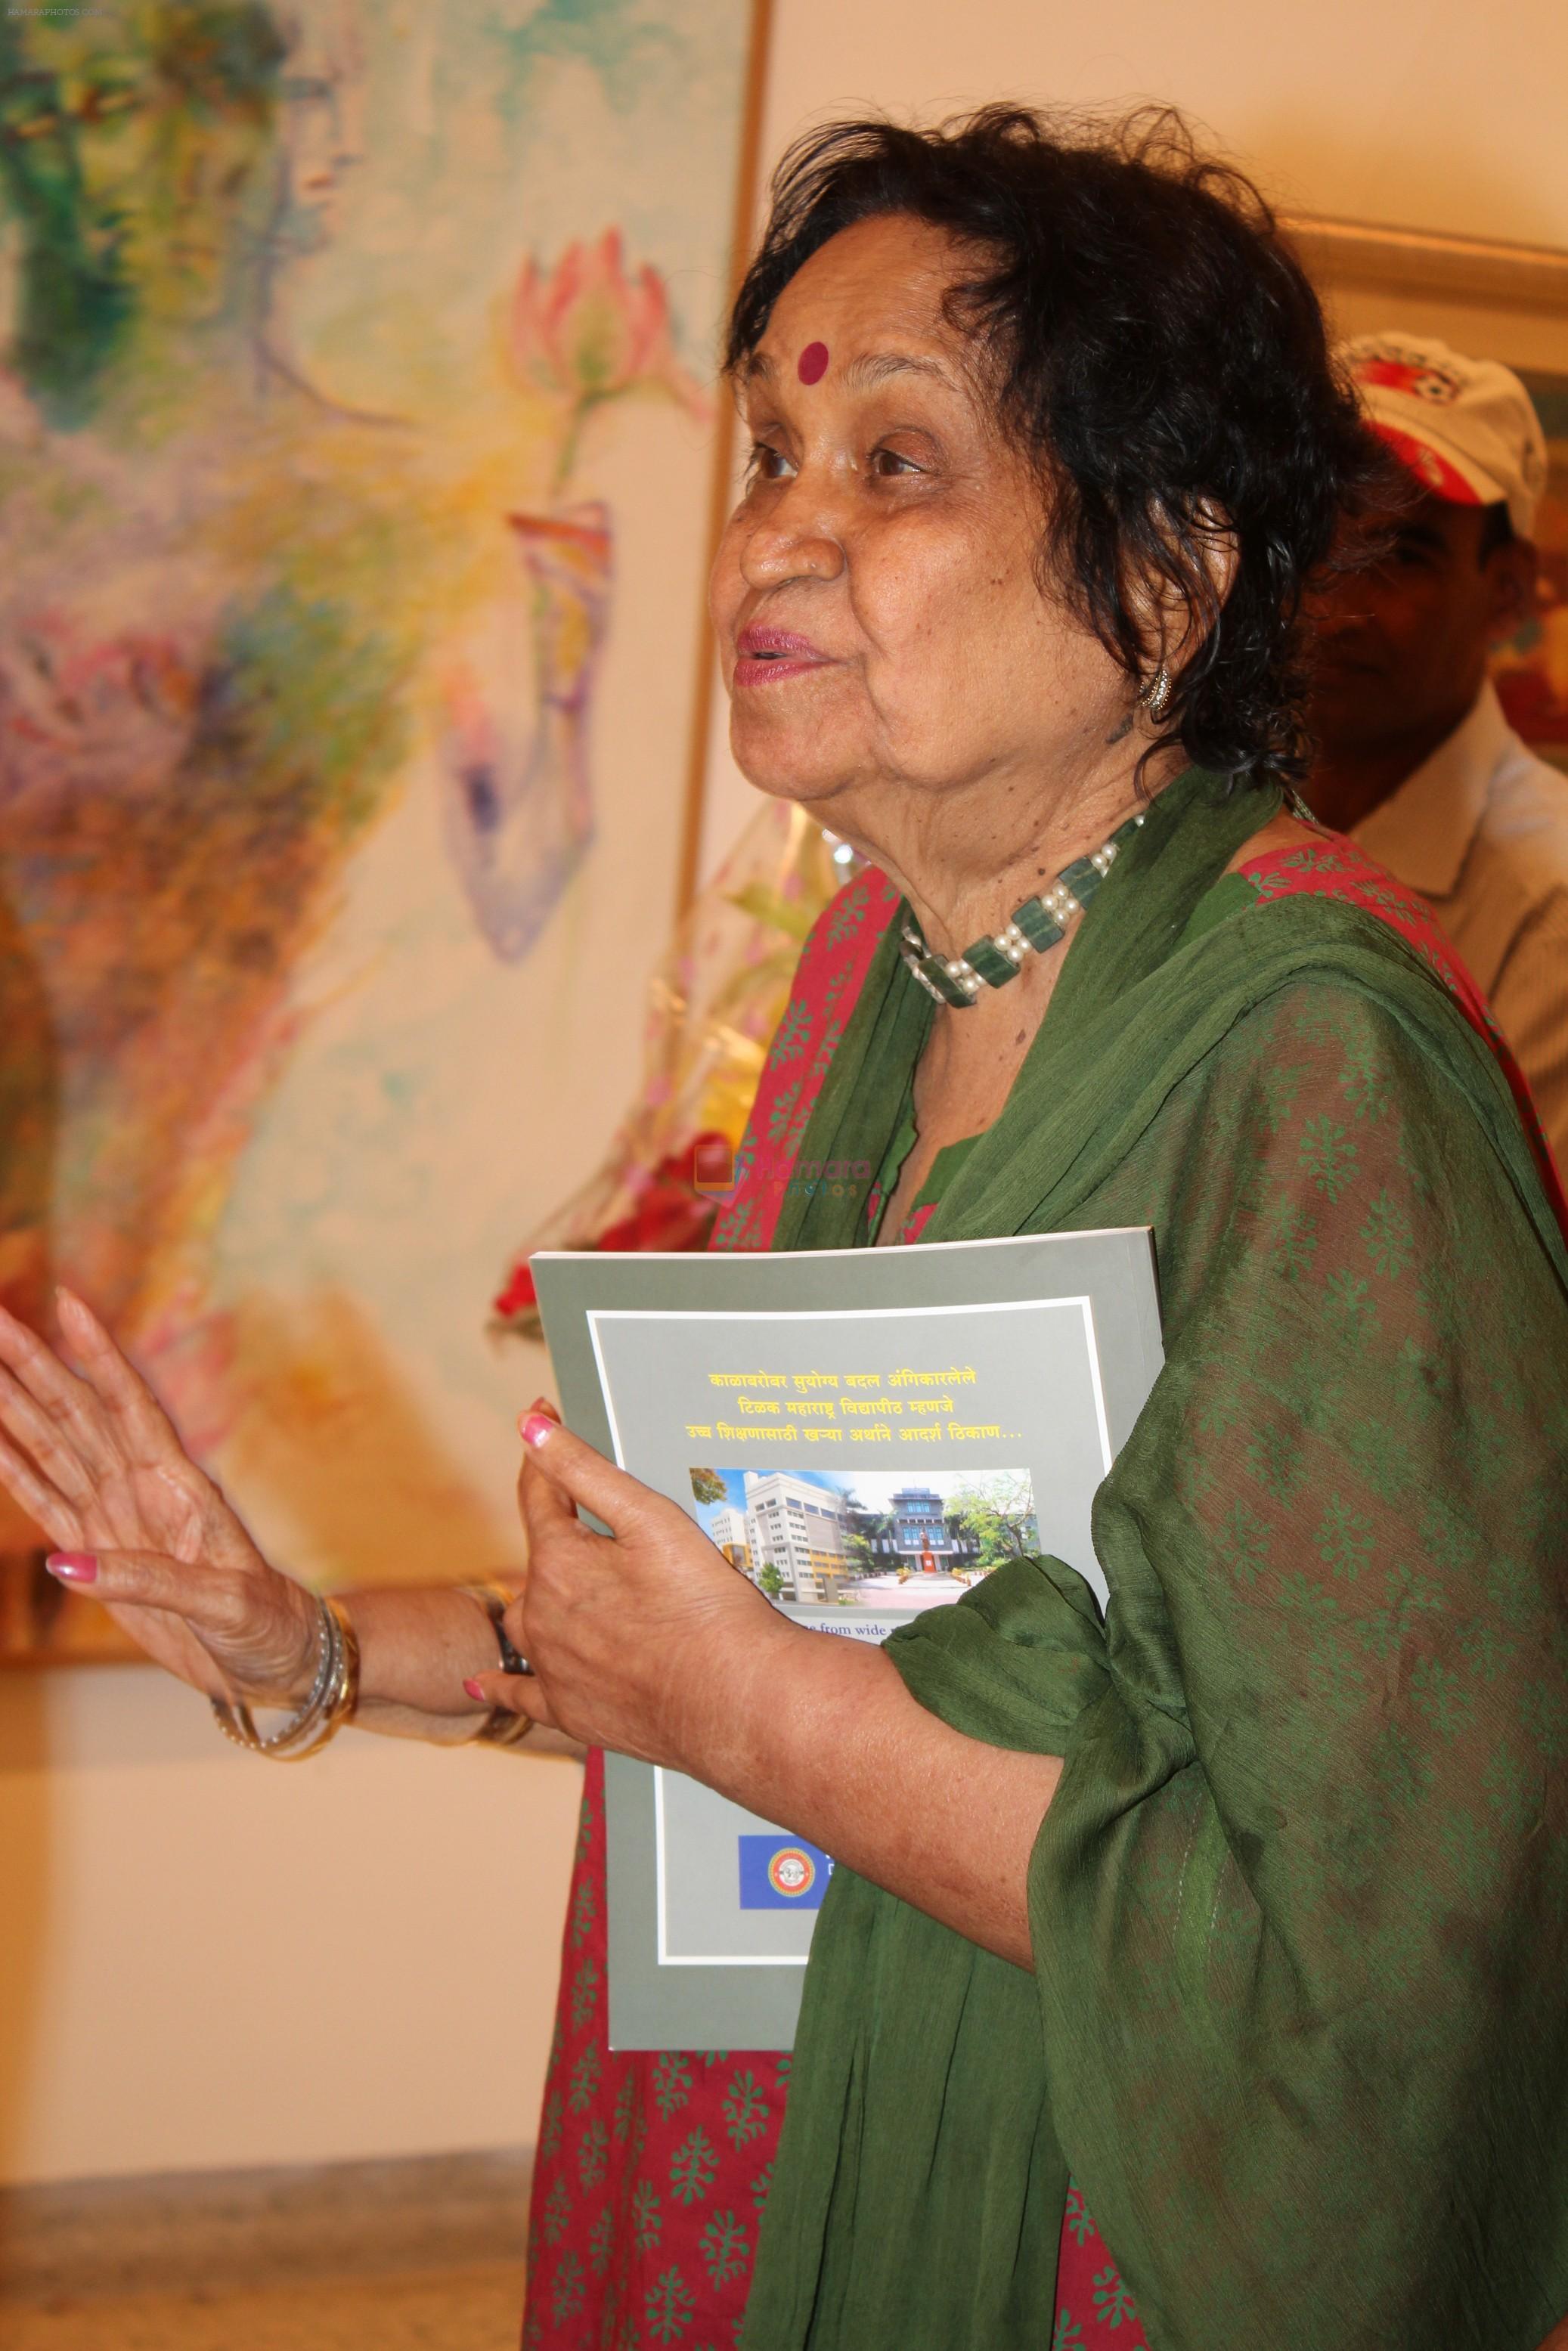 Anjolie_Ela_Menon at Rejuvenation 2012 � An exhibition of Sculptures by Basudeb Biswas & Paintings by Subroto Mandal in Jahangir Art Gallery on 9th May 2012